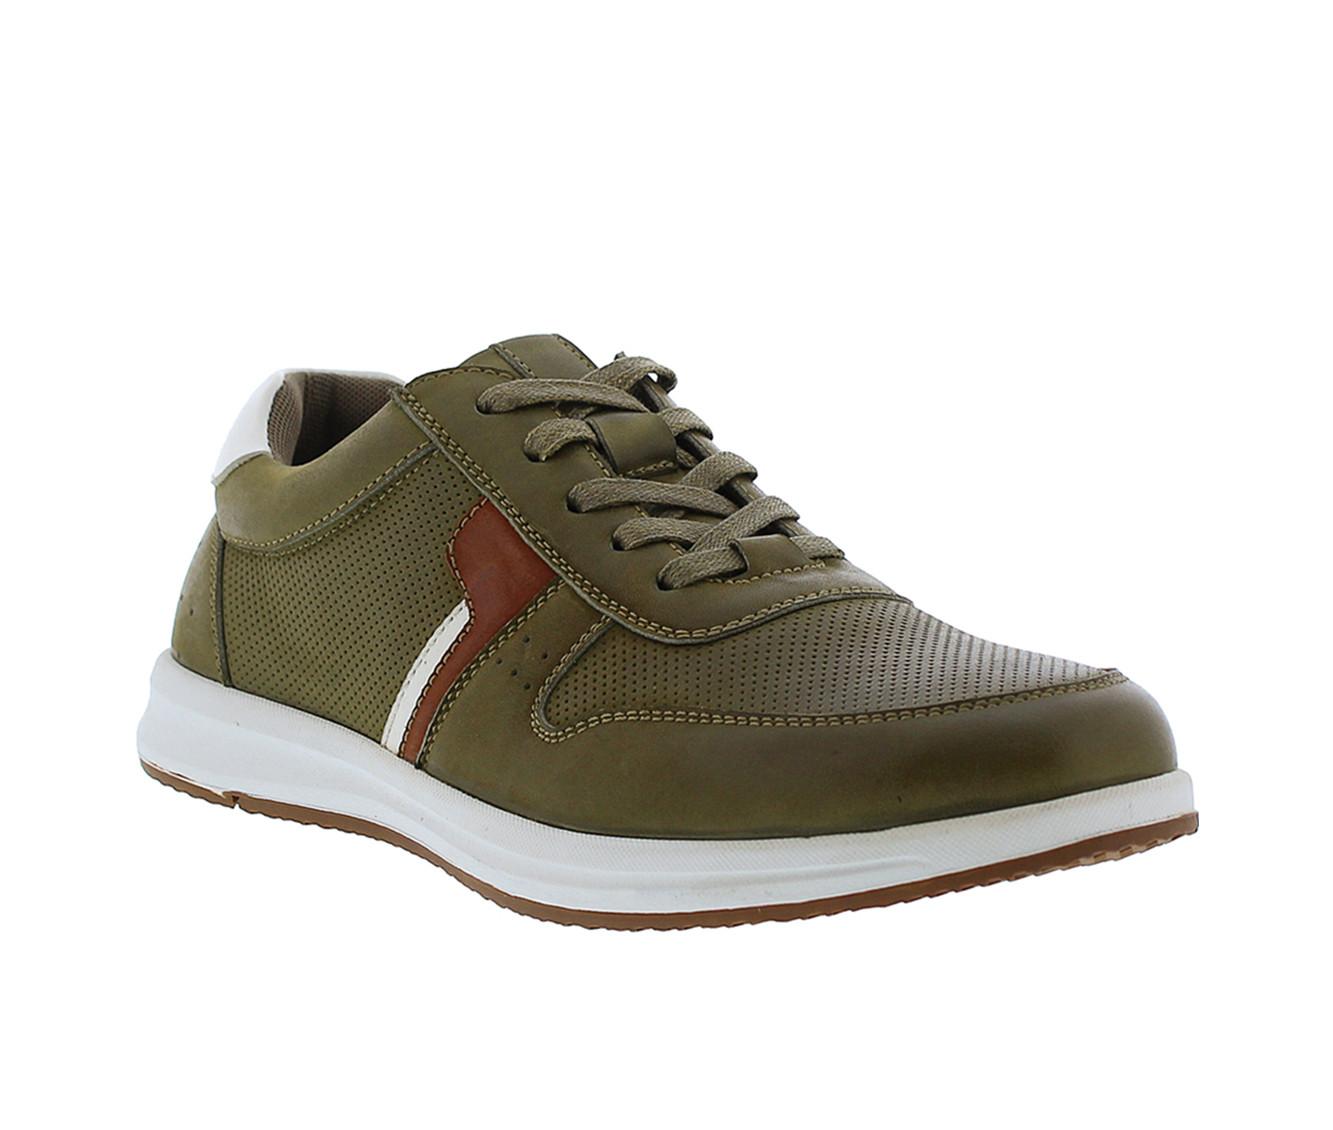 Men's English Laundry Brady Casual Oxford Sneakers